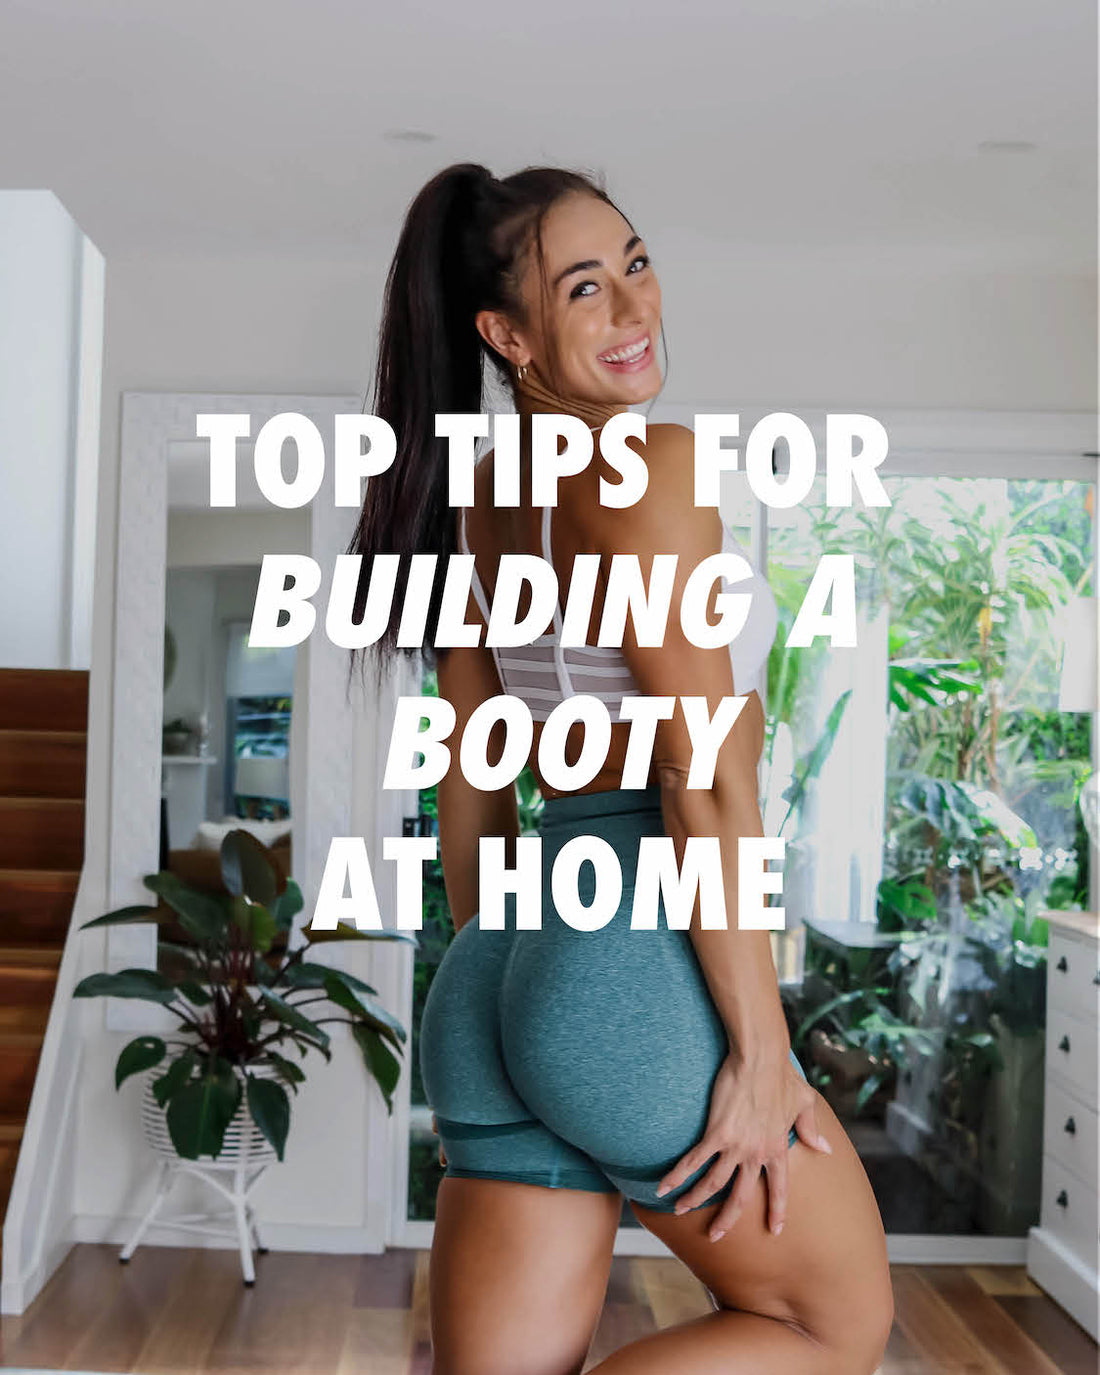 Top tips for building a booty at home